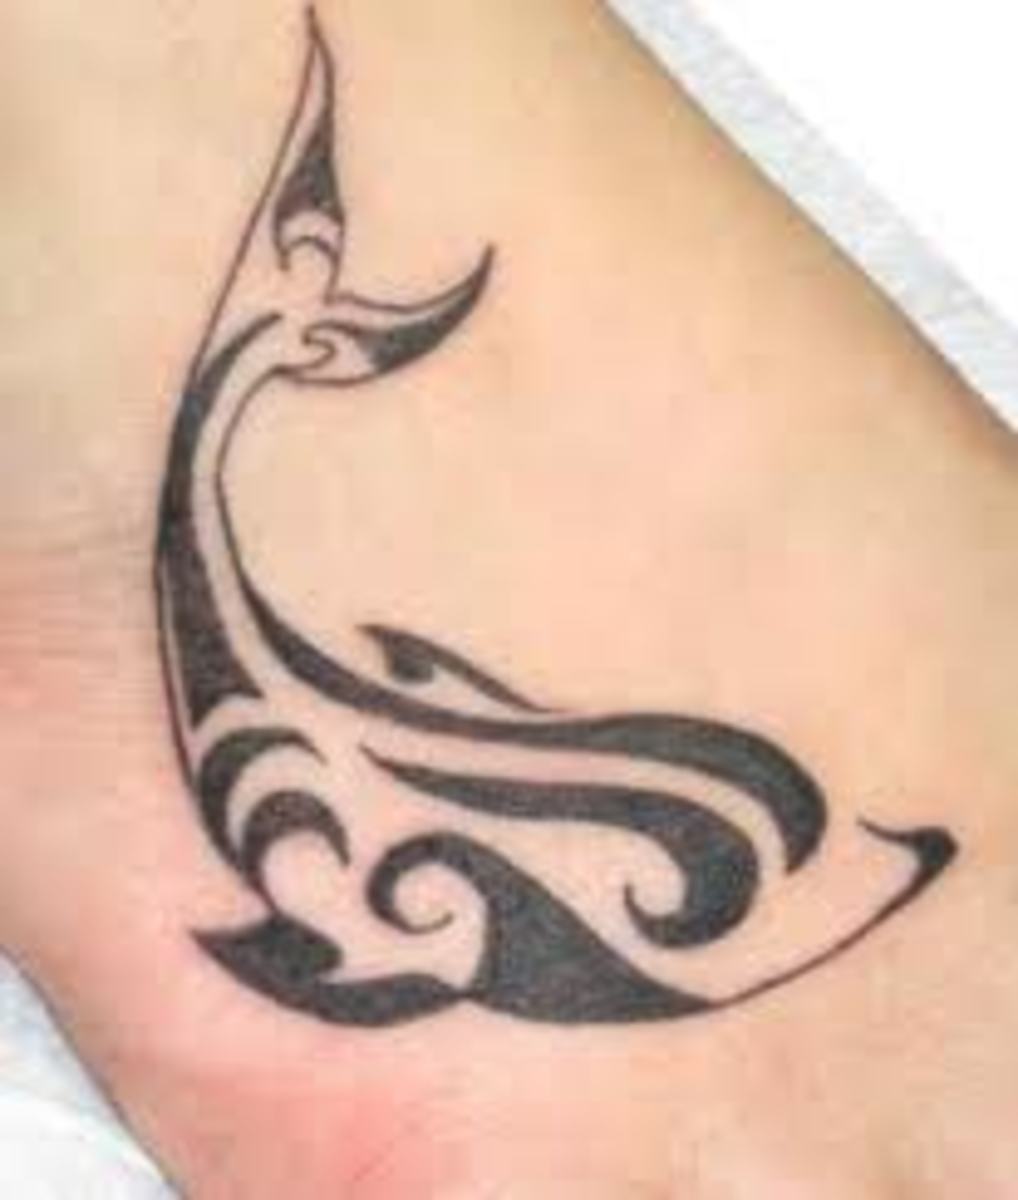 Dolphin Tattoo Designs And Dolphin Tattoo Meanings-Dolphin Tattoo Ideas And Tattoo Photos